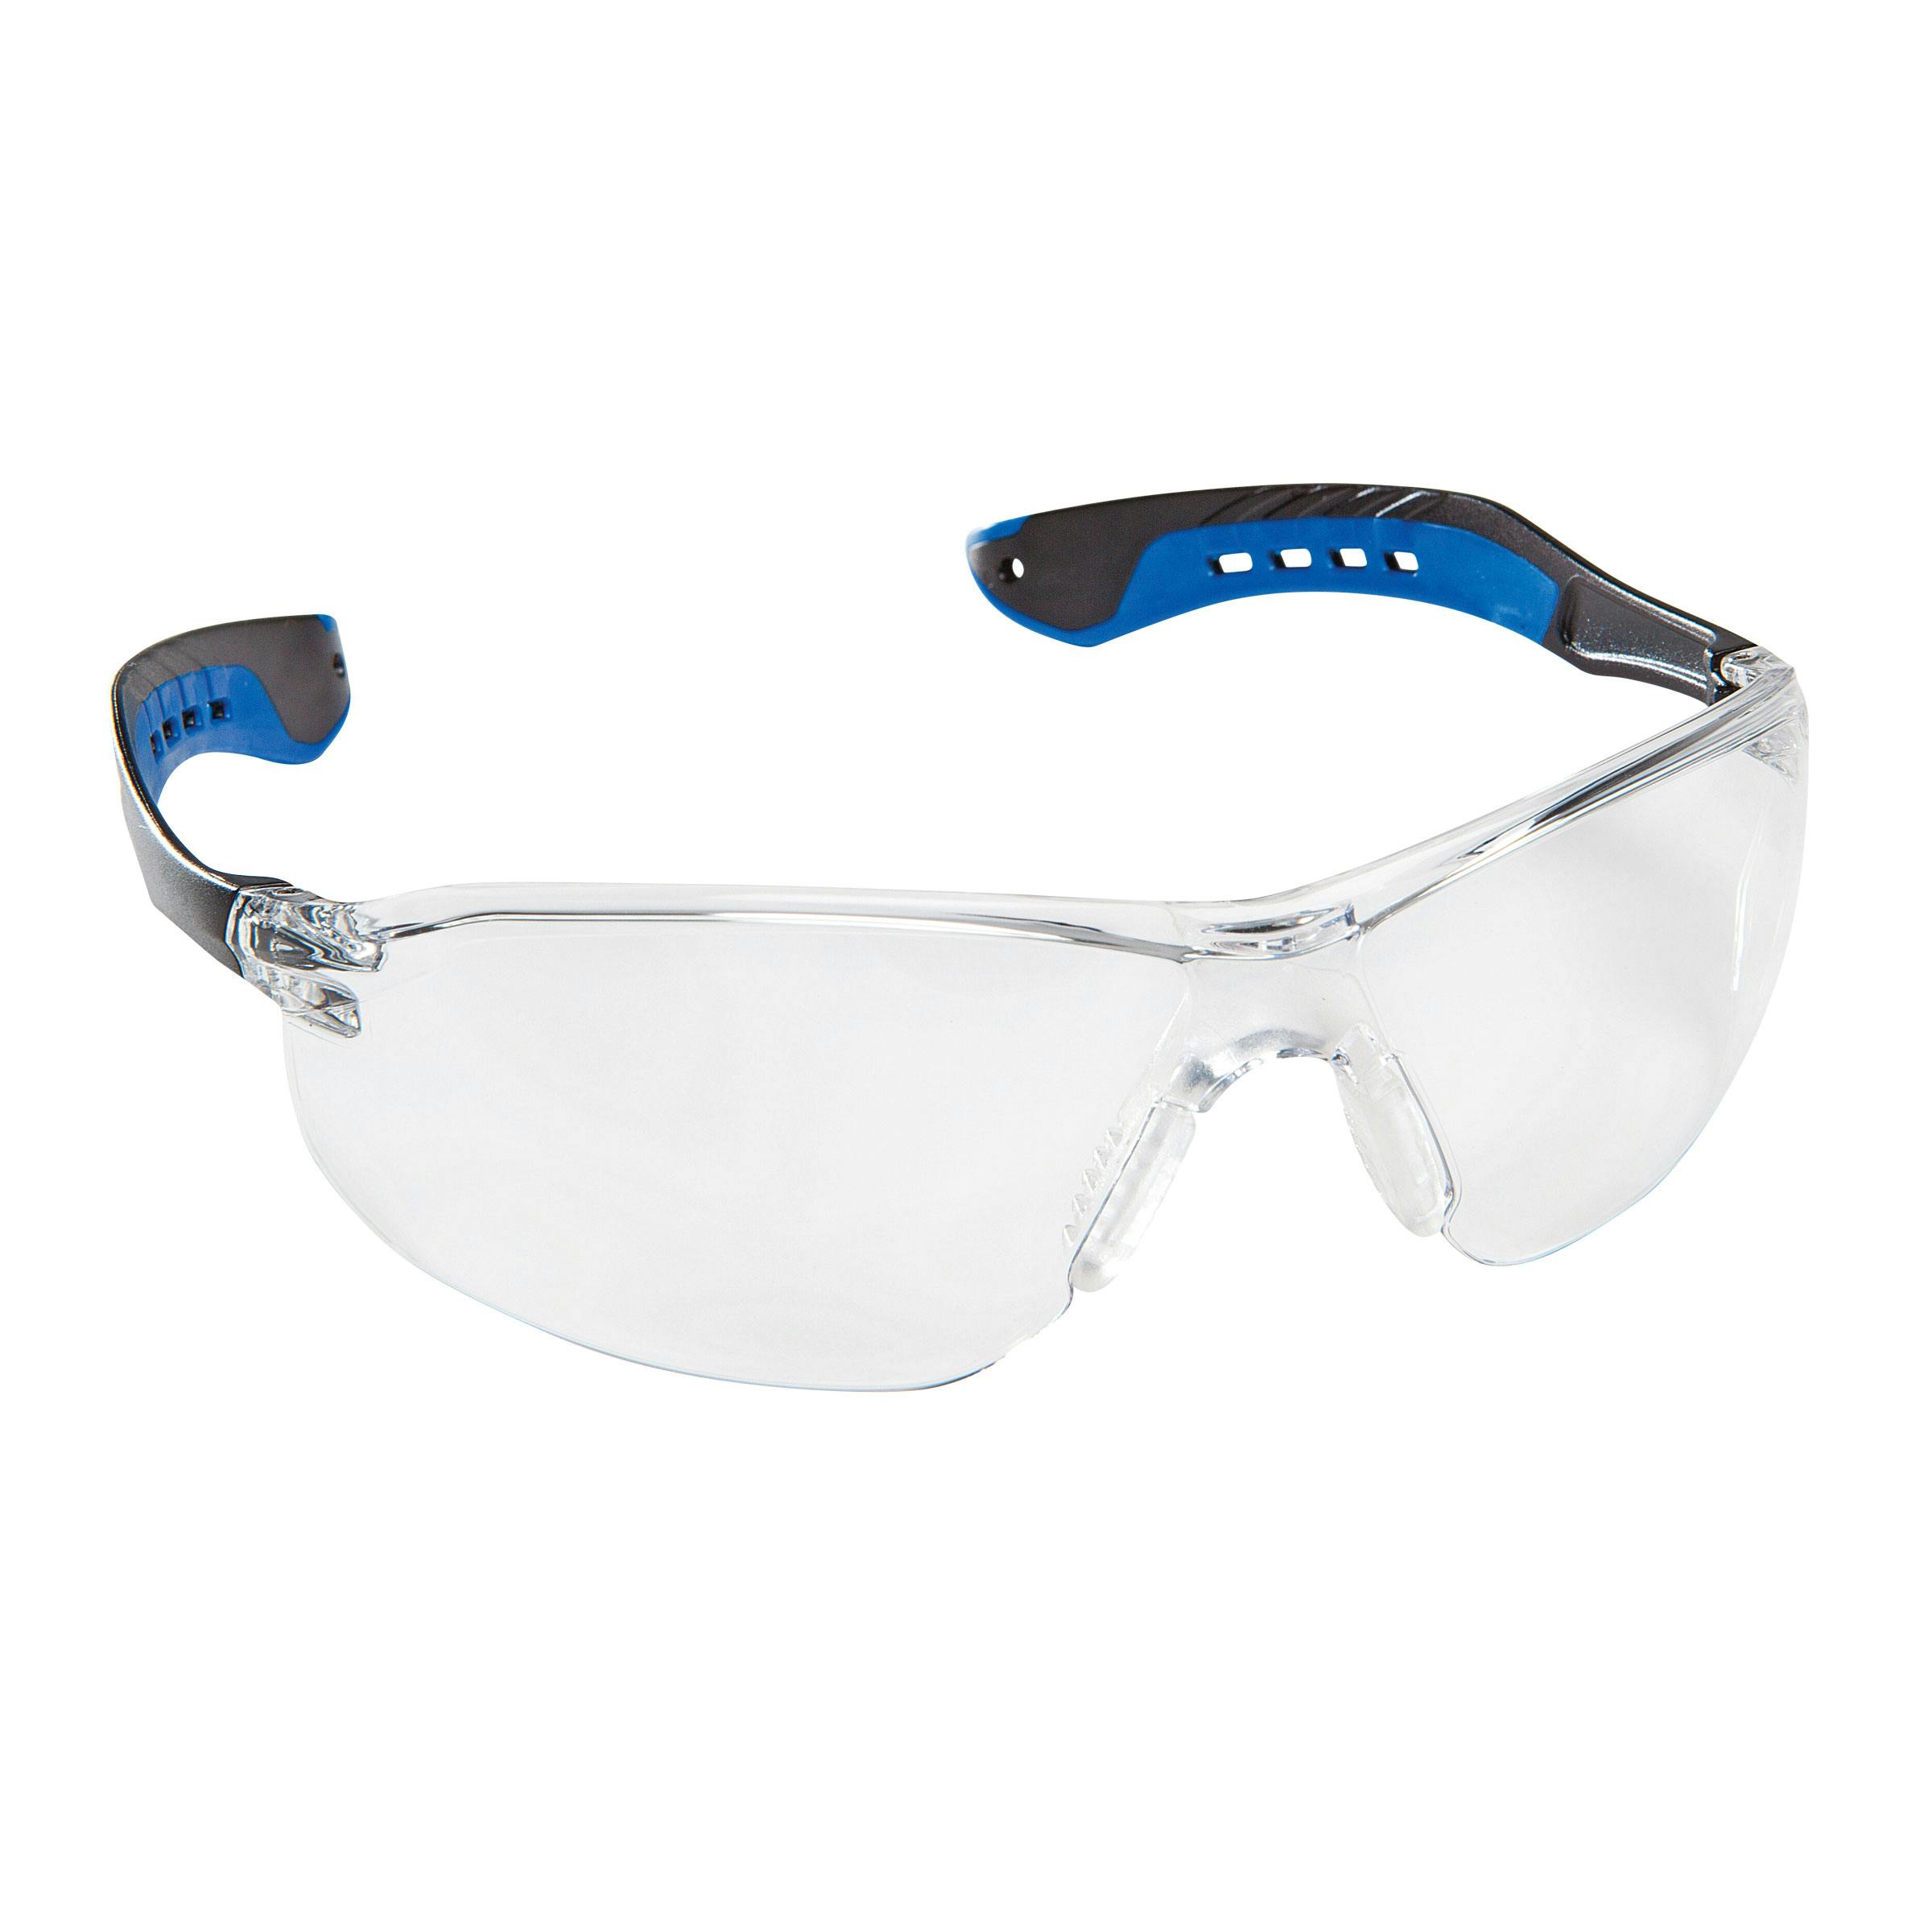 Force360 Glide Safety Spectacle